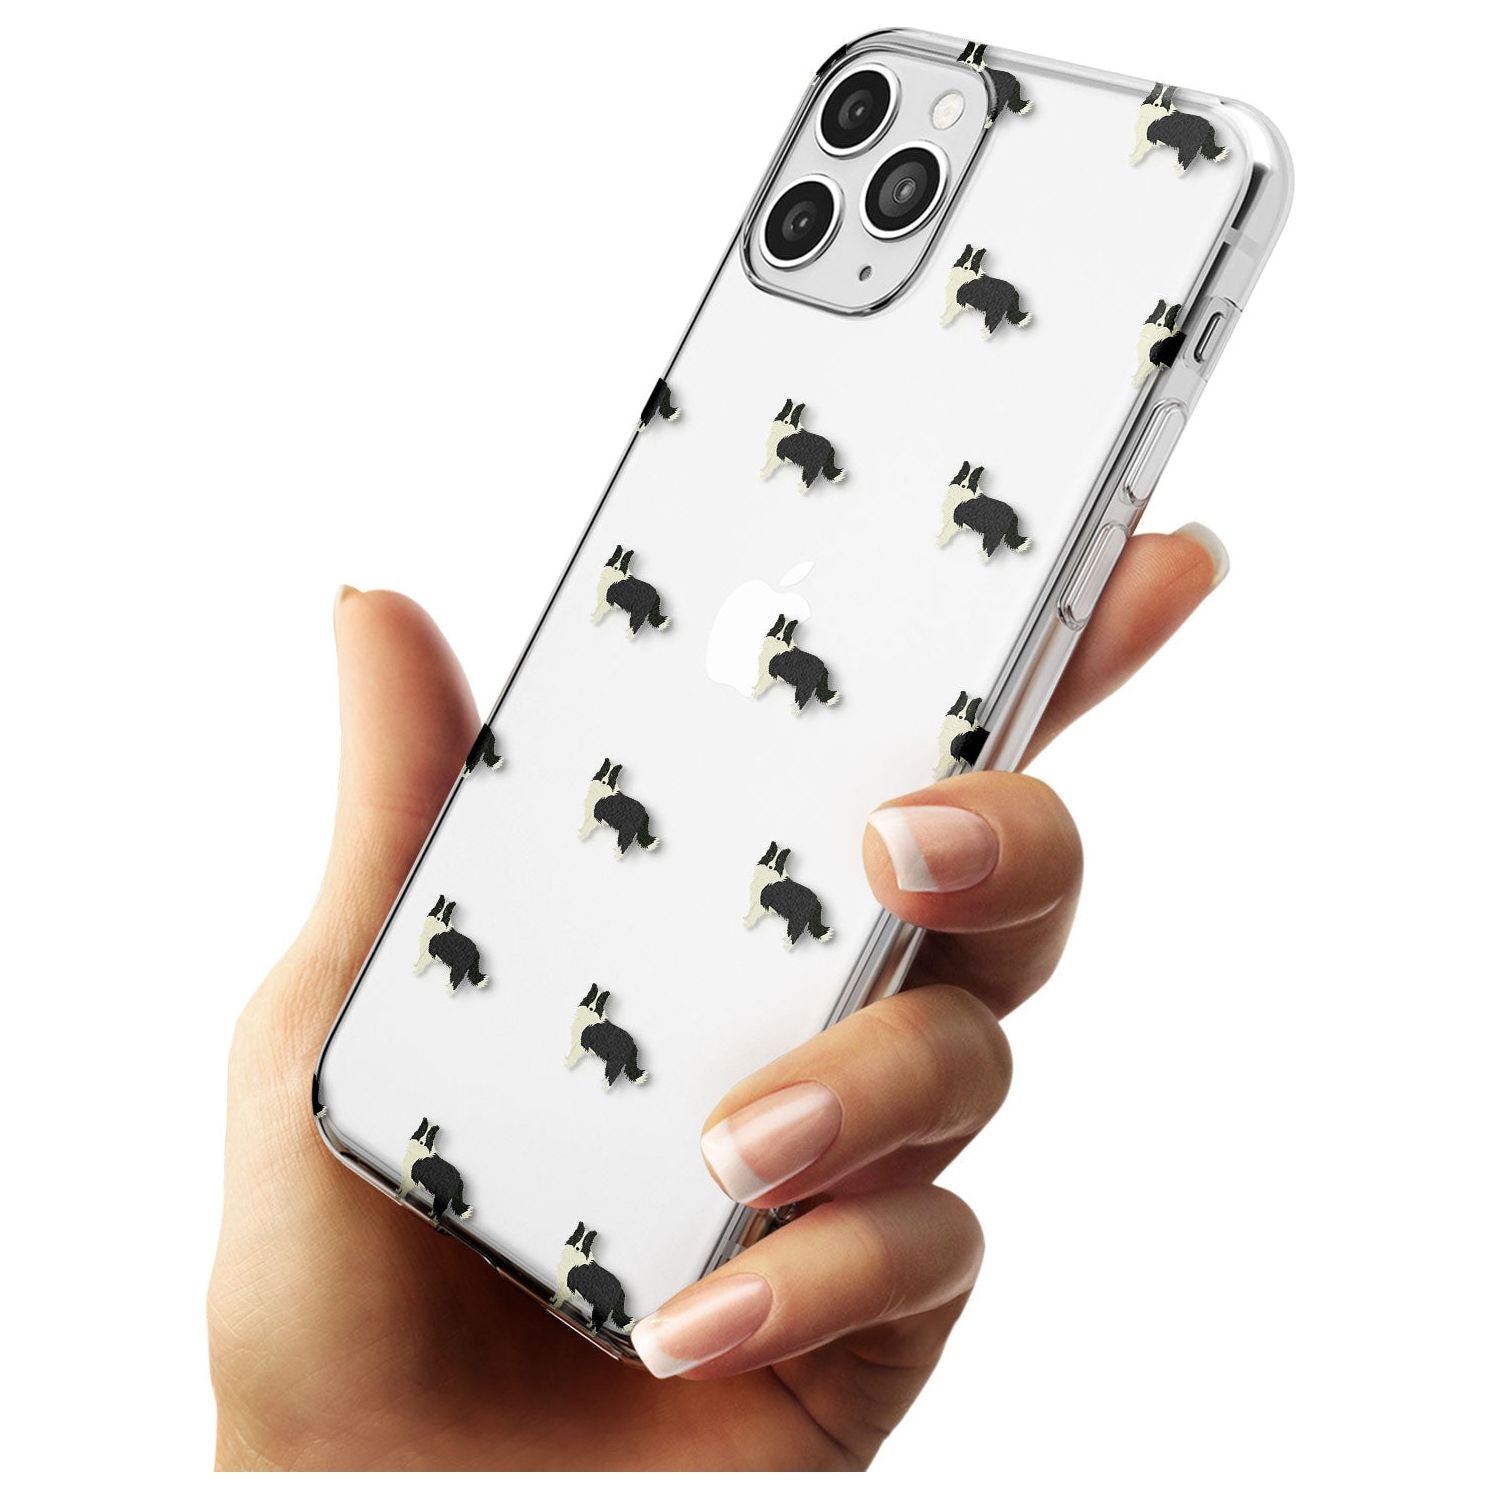 Border Collie Dog Pattern Clear Slim TPU Phone Case for iPhone 11 Pro Max